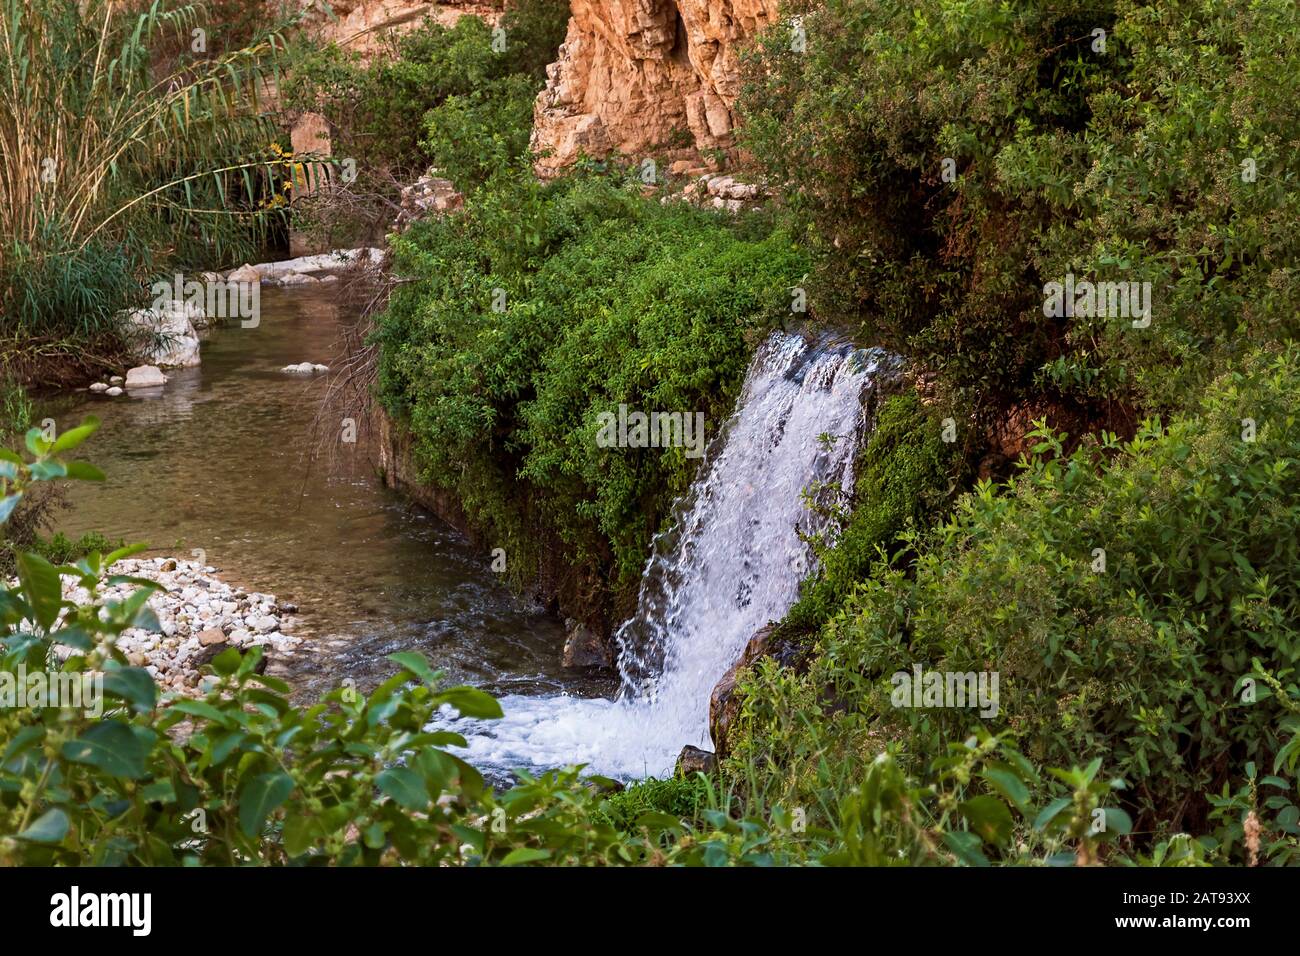 a spring fed waterfall gushes out of the limestone, cliffs of wadi qelt nahal prat in the Judean Desert surrounded by lush riparian vegetation Stock Photo